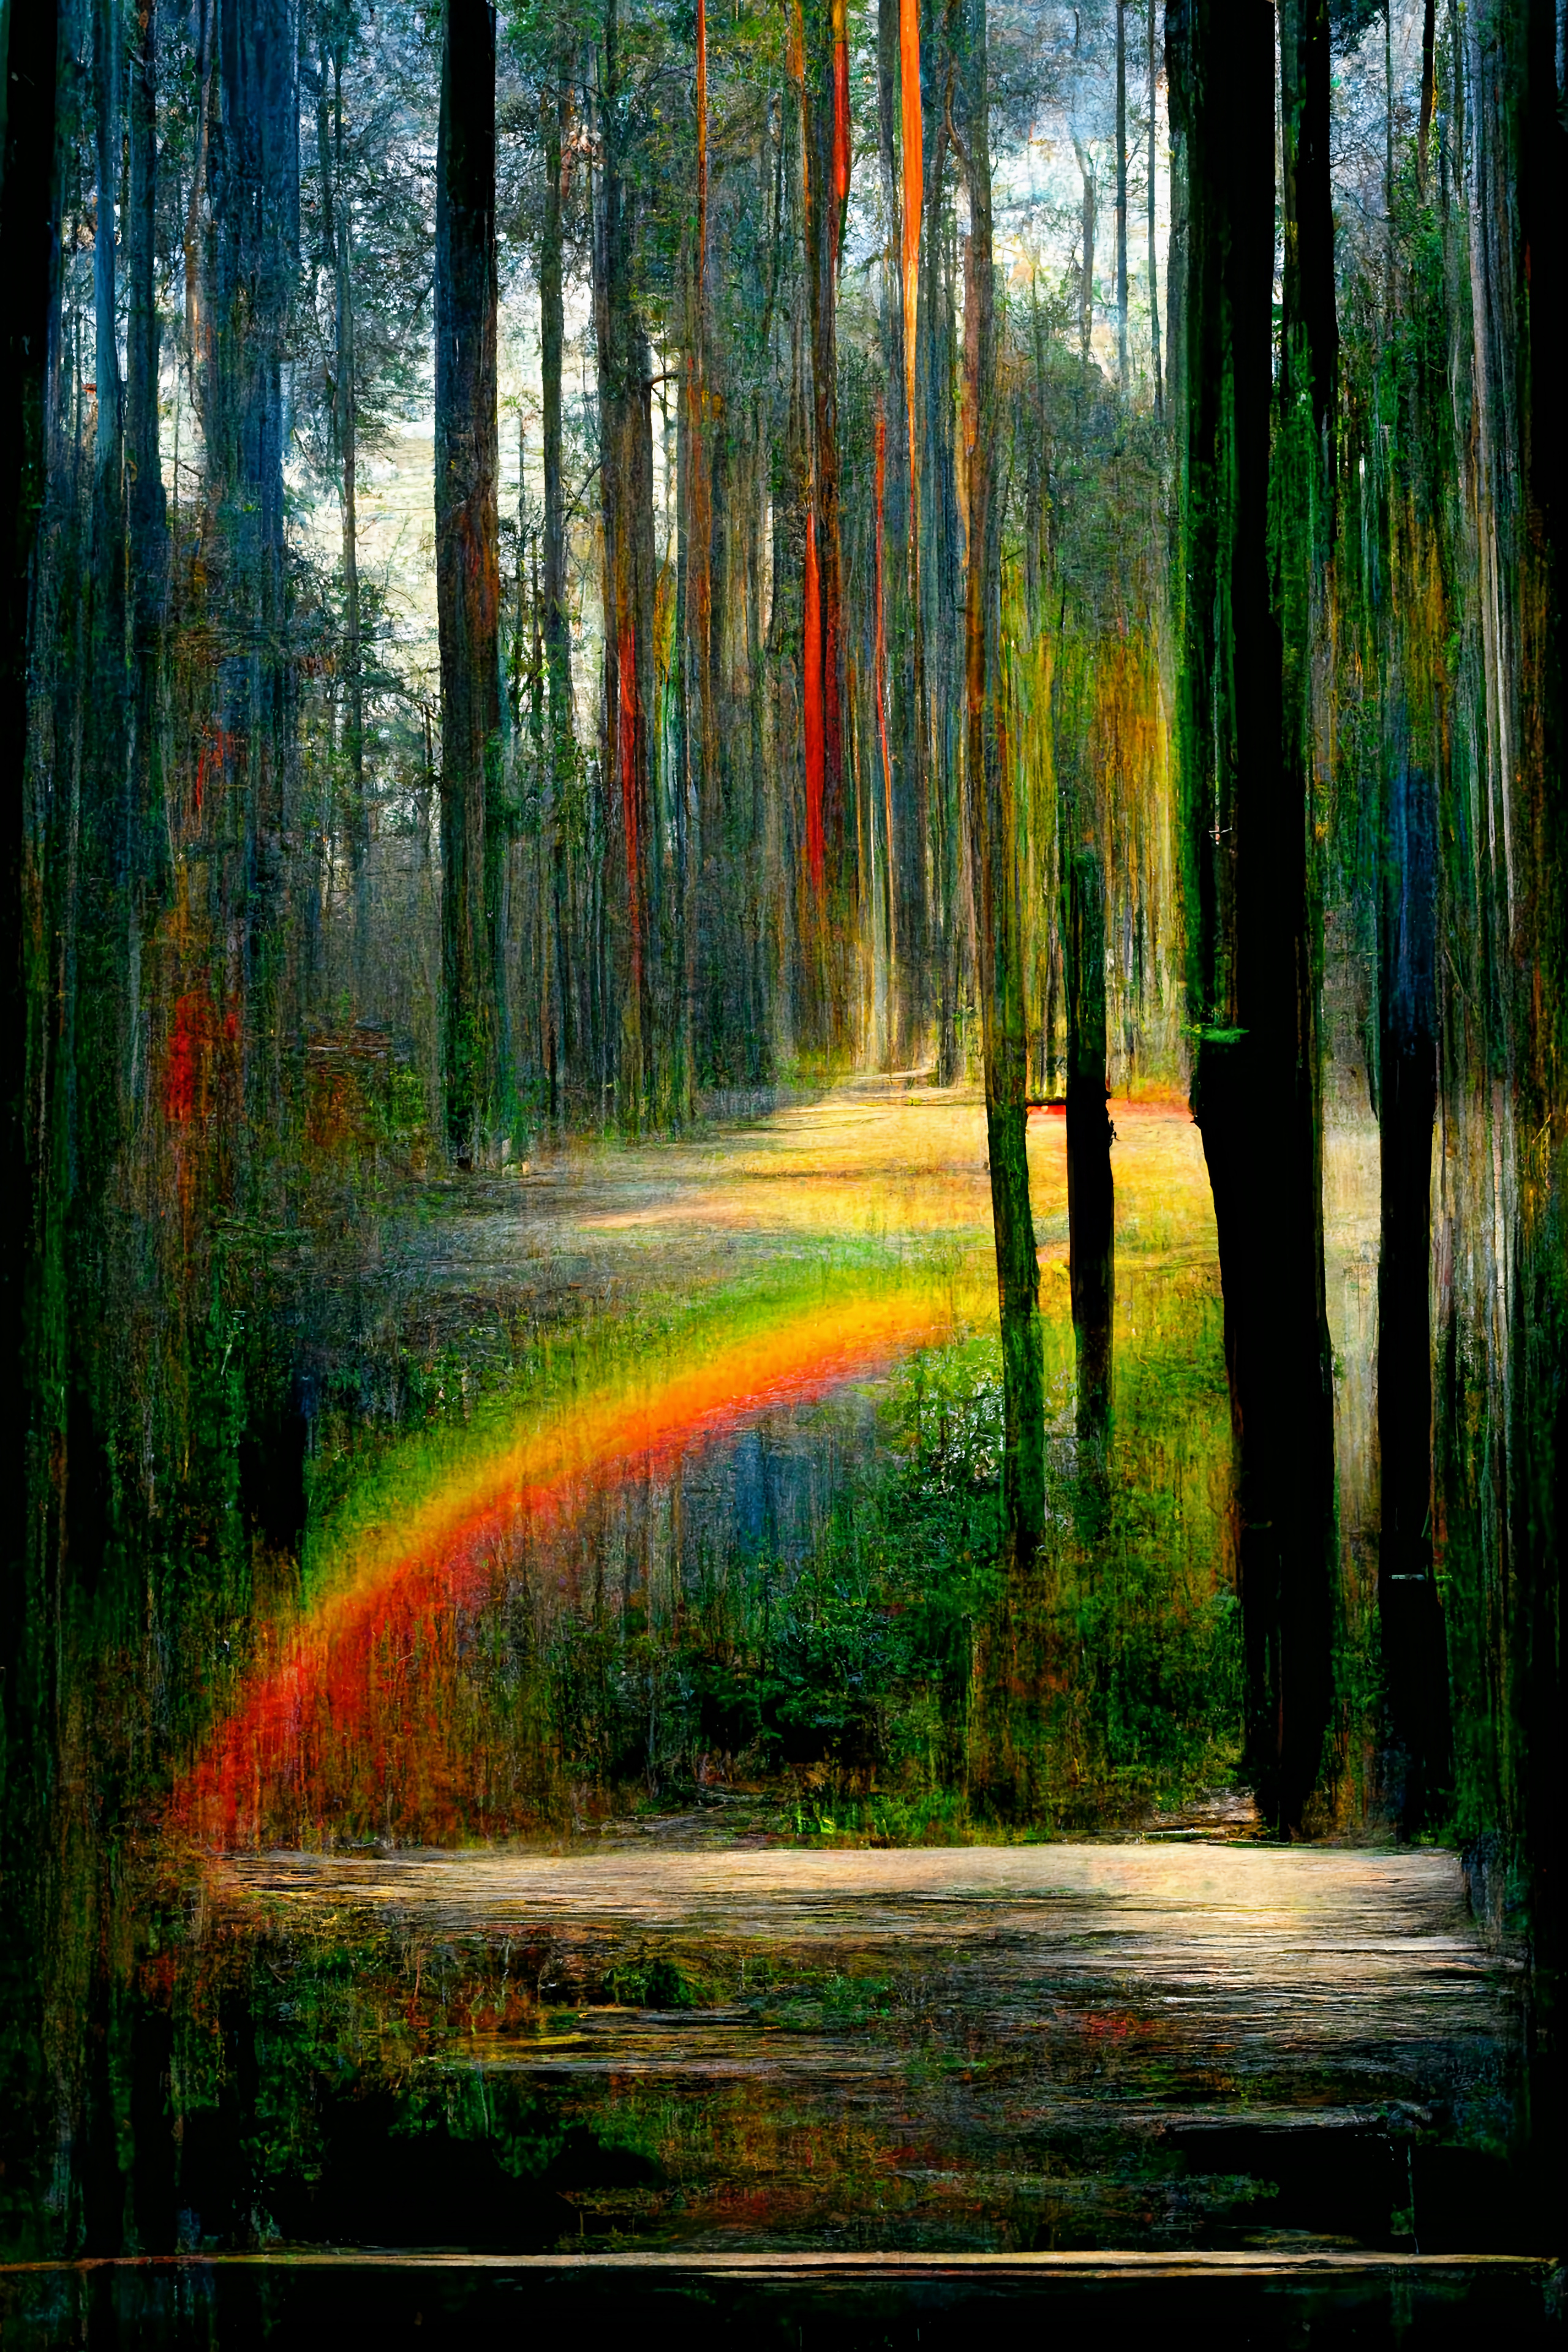 Where the rainbow touches the forest